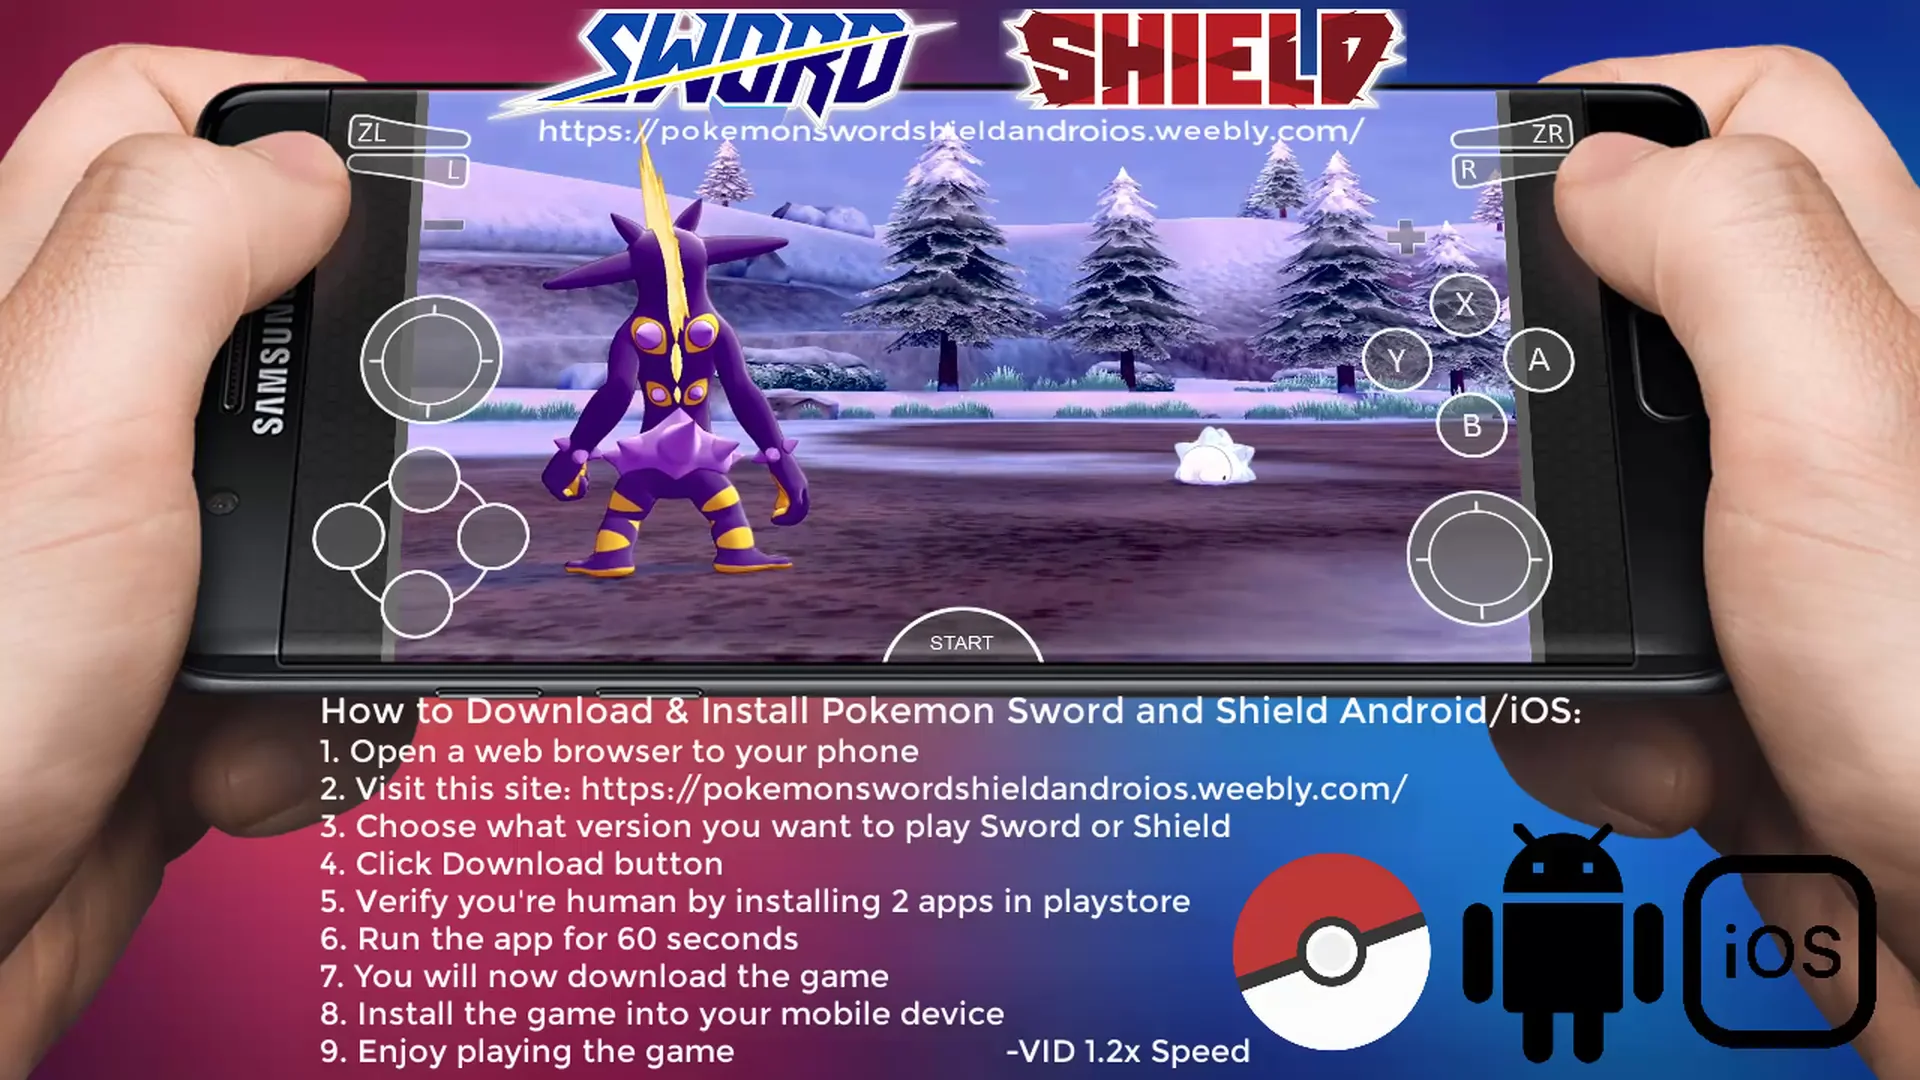 How To Download And Play Pokemon Sword And Shield In Android